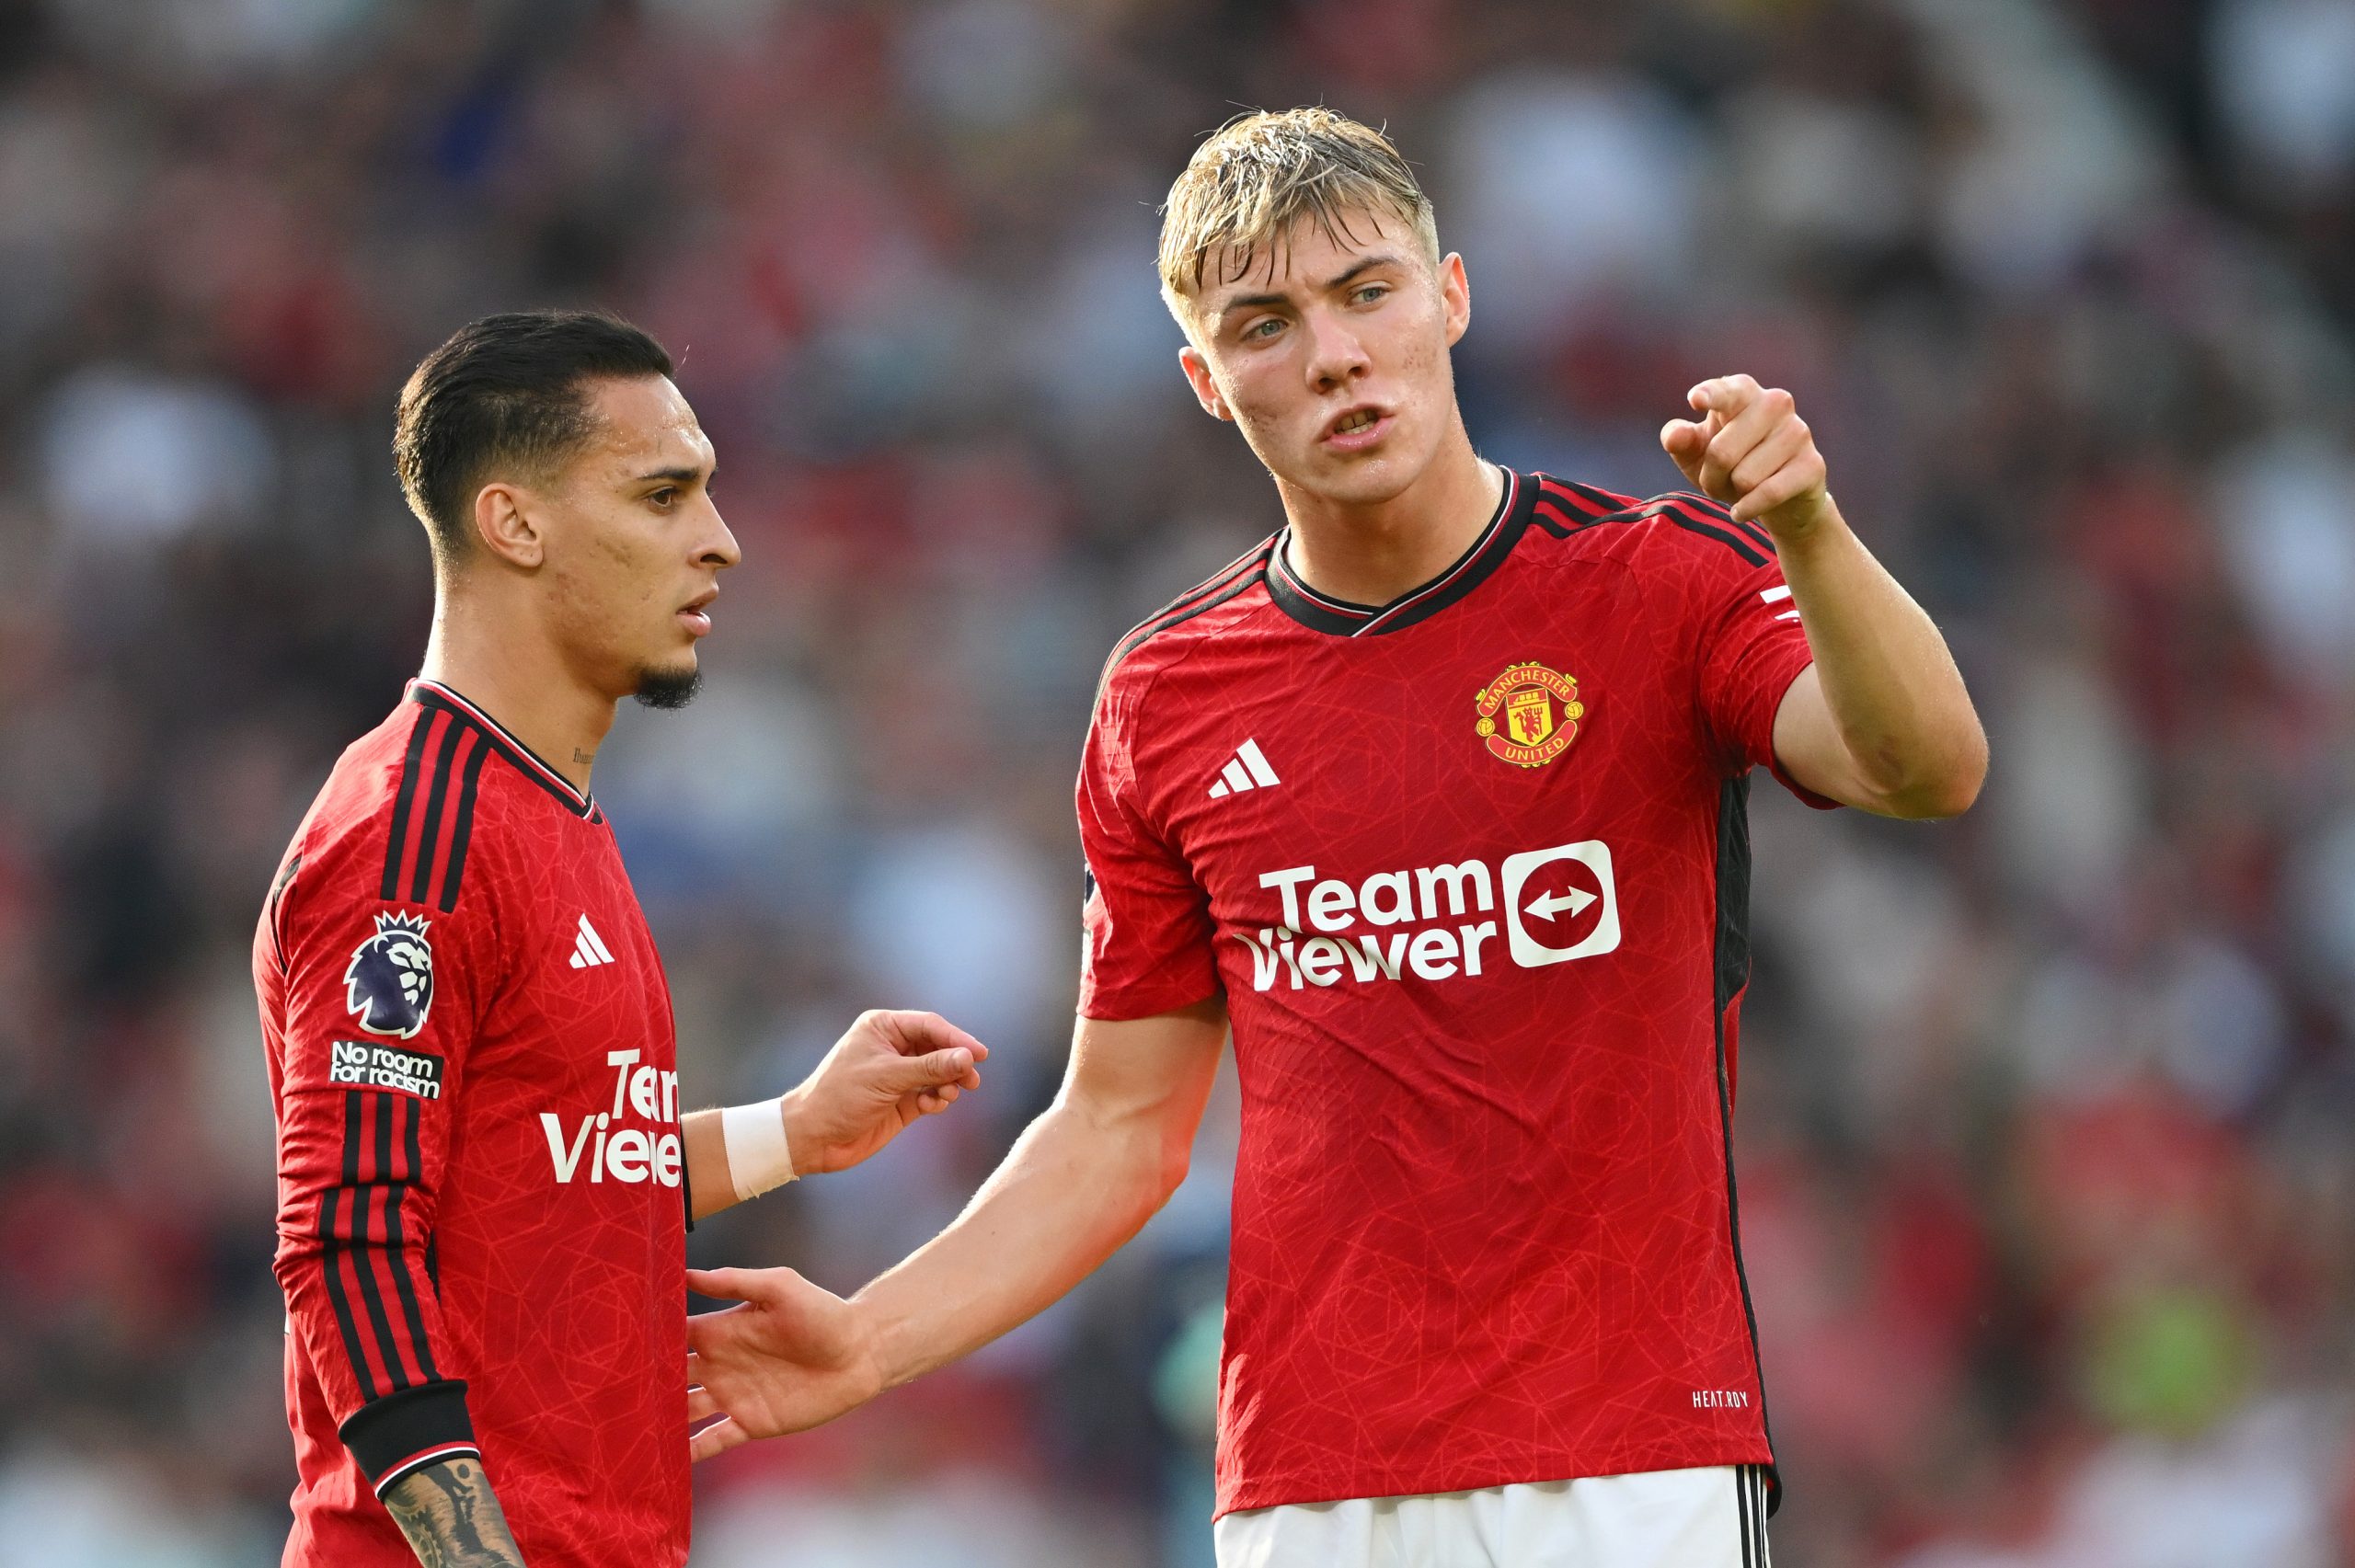 Manchester United star Rasmus Højlund complained to Erik ten Hag about Bruno Fernandes earlier in the season.